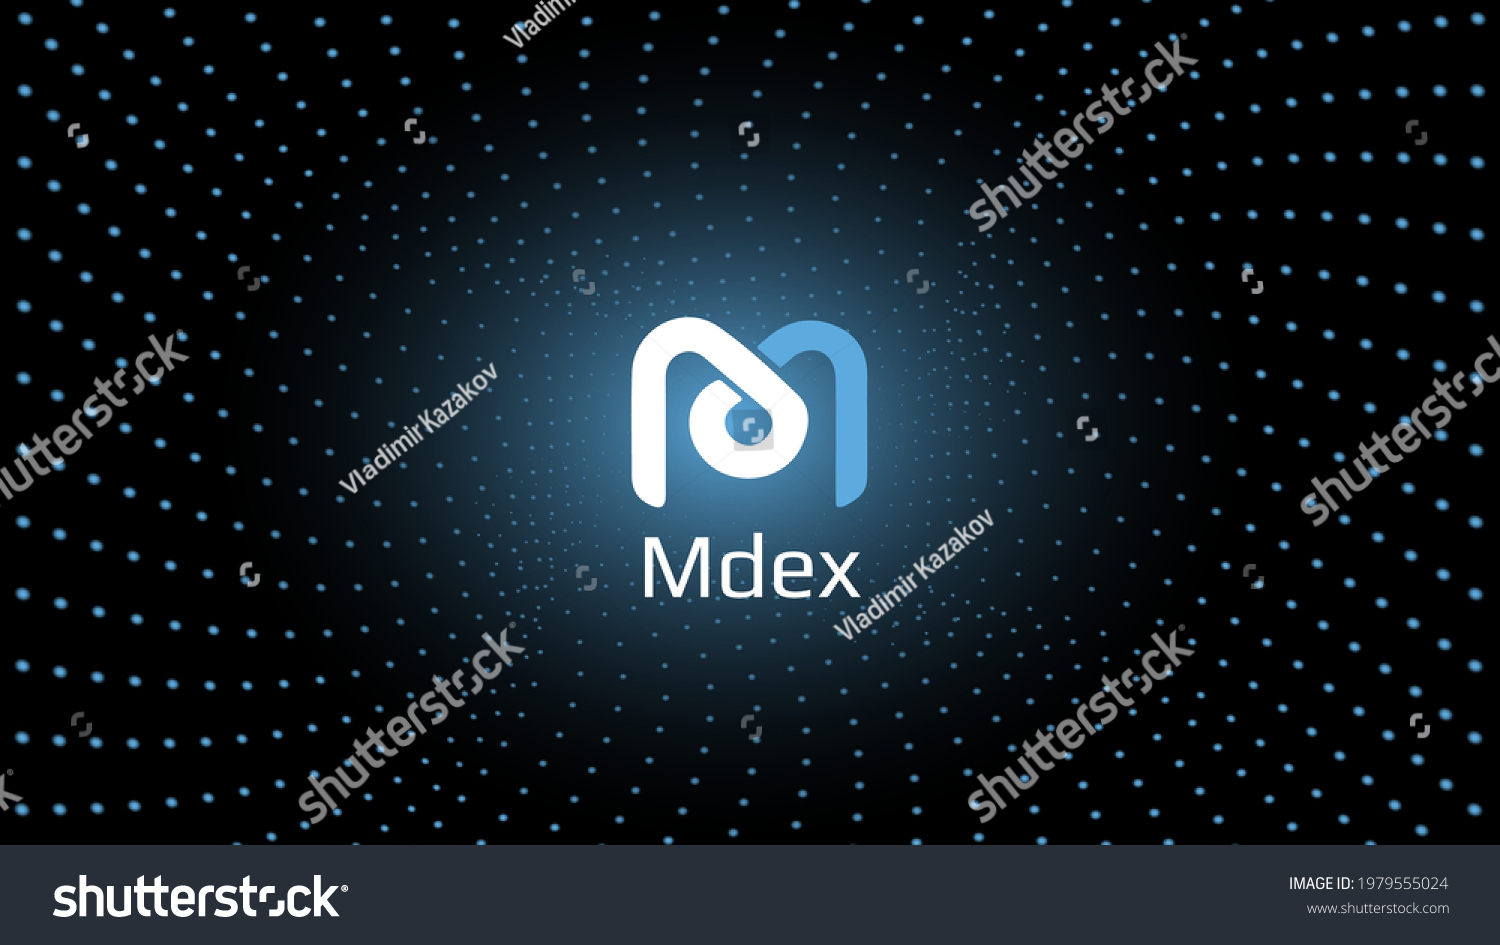 SVG of Mdex MDX token symbol cryptocurrency in the center of spiral of glowing dots on dark background. Cryptocurrency logo icon for banner or news. Vector illustration. svg